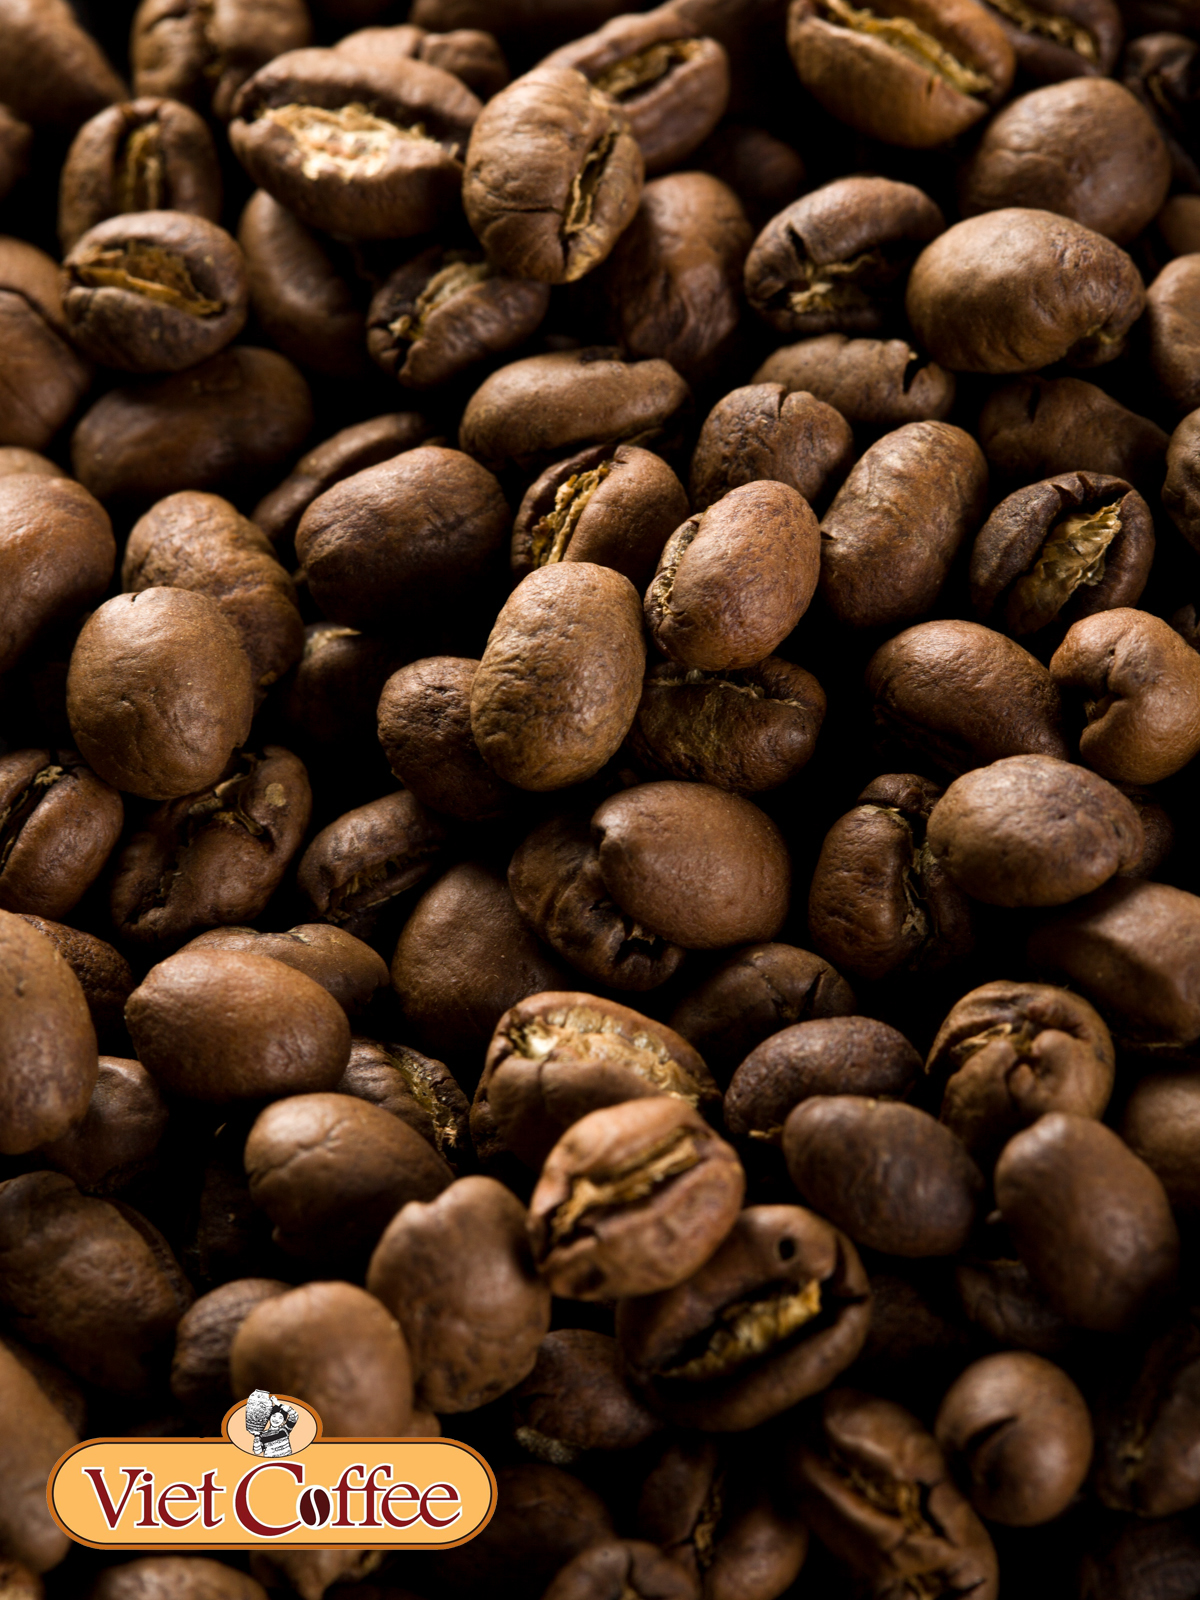 Peaberry after roasting